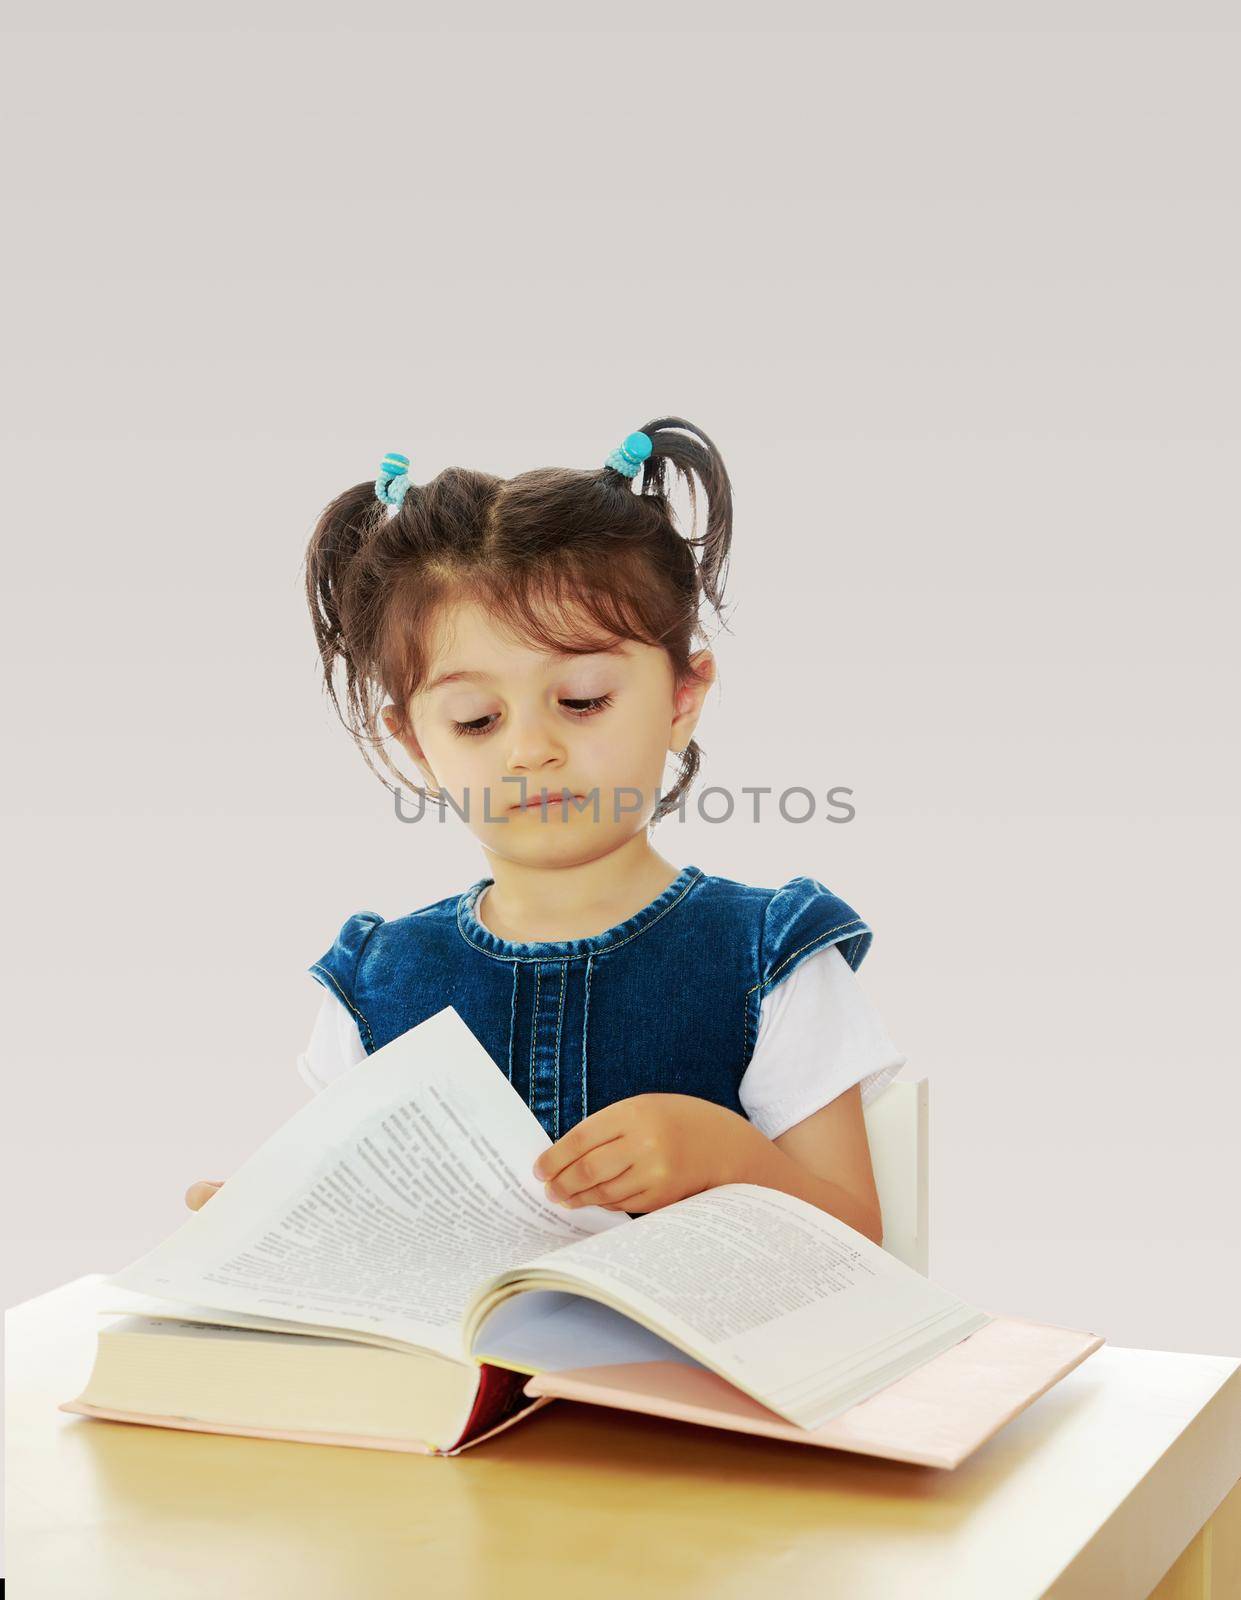 Pretty little girl in blue denim dress reading a book sitting at the table.On a gray background.